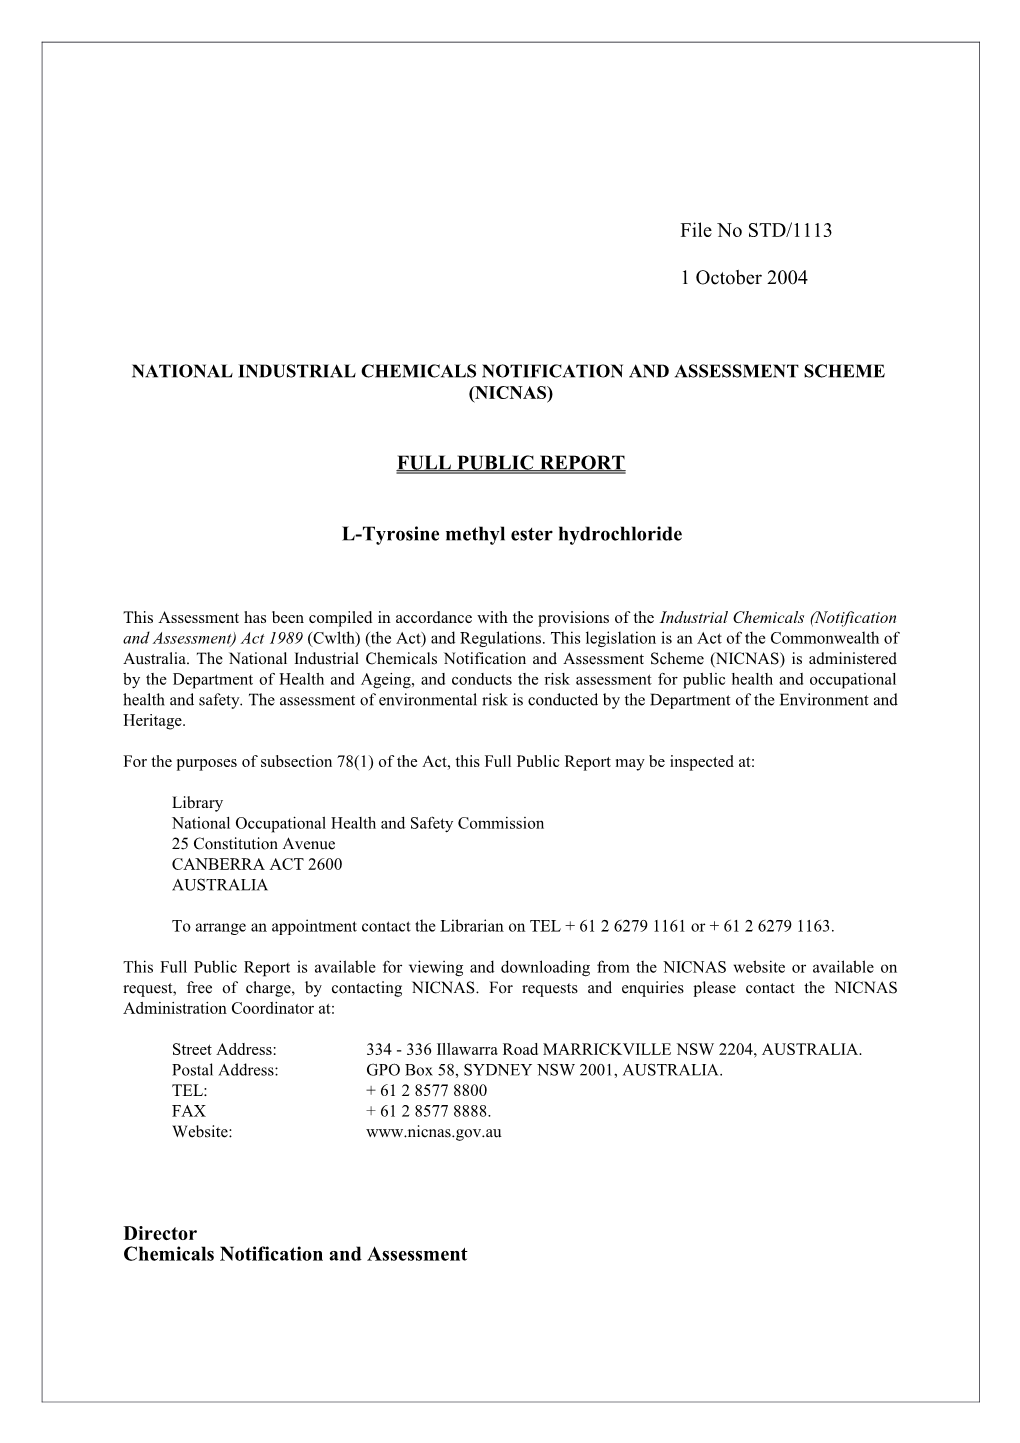 National Industrial Chemicals Notification and Assessment Scheme s61